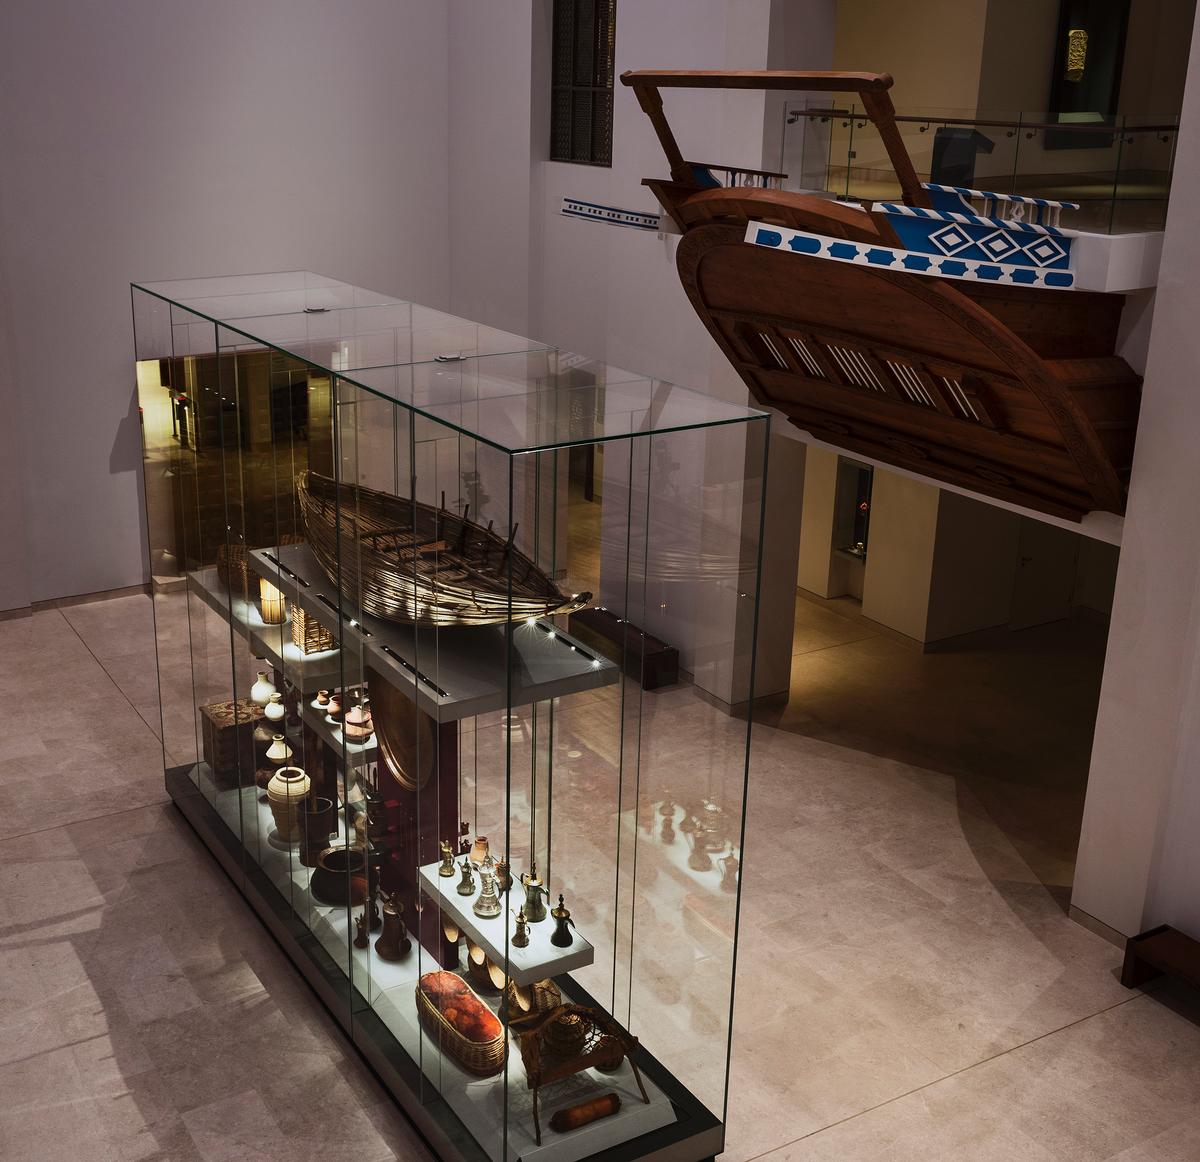 The museum has 12,000-plus artefacts in its collection